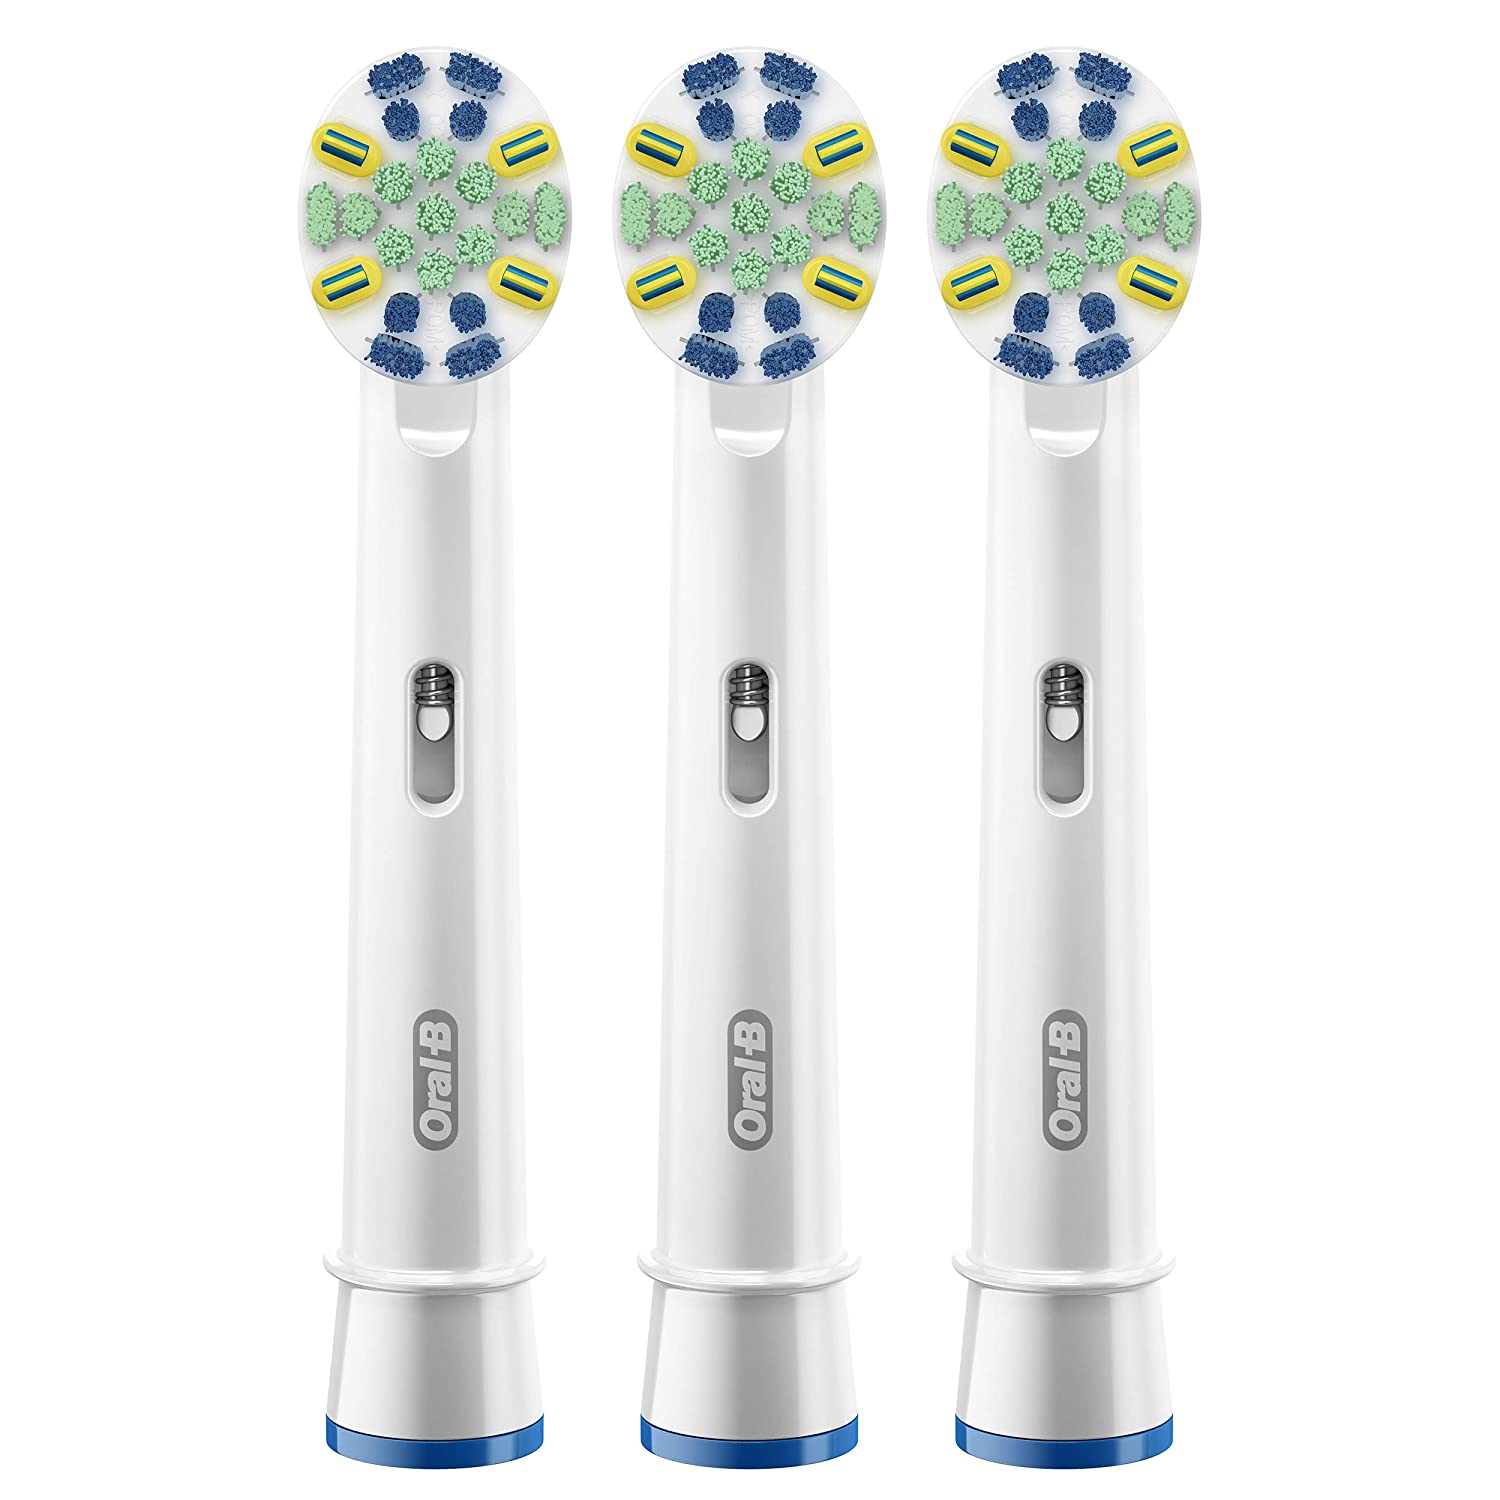 Oral-B CrossAction - Replacement Toothbrush Head for Oral-B Electric Toothbrushs, 3 Count.